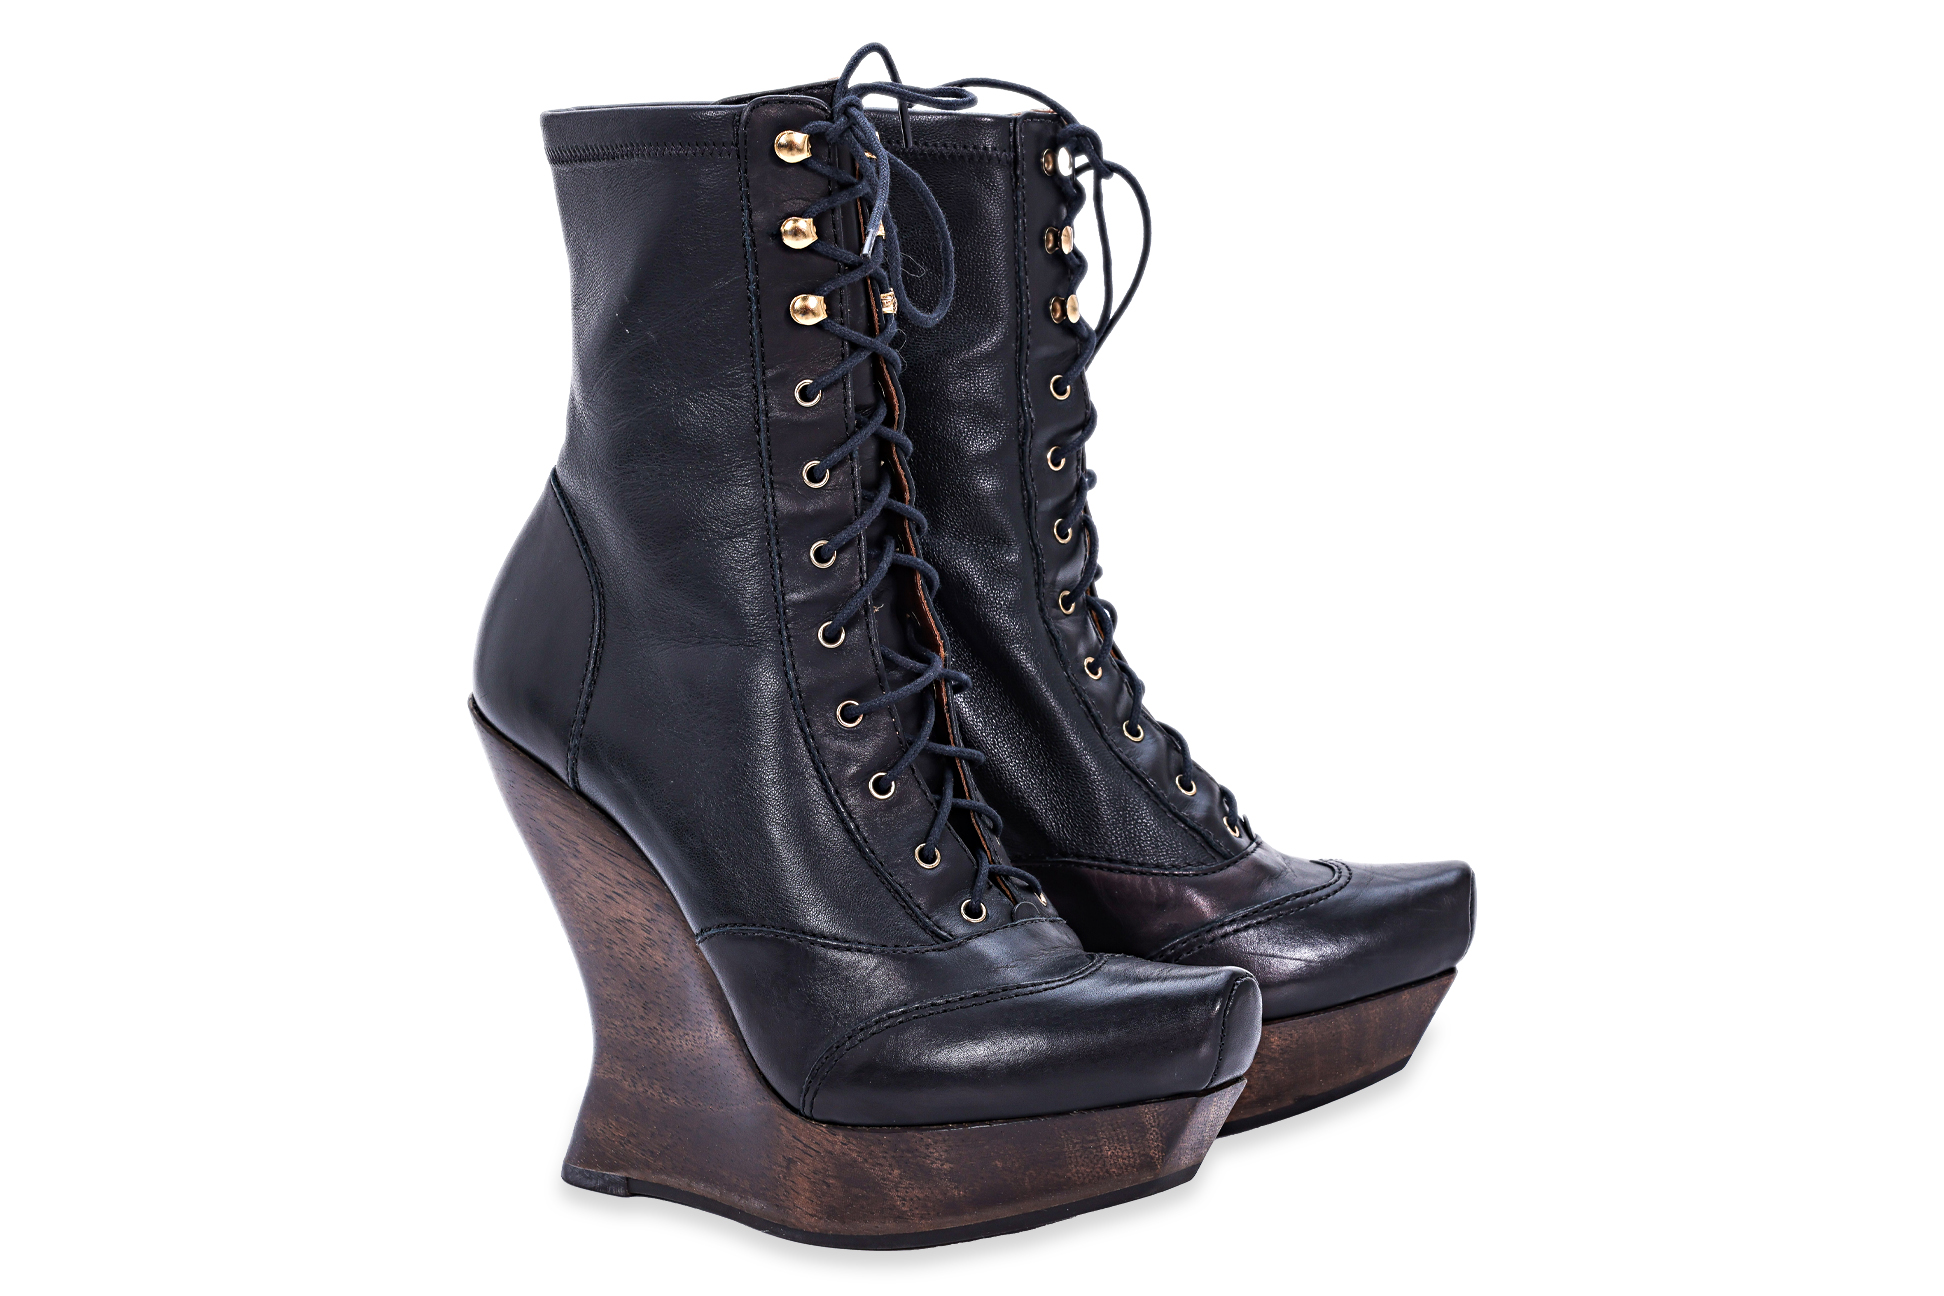 A PAIR OF MCQ BY ALEXANDER MCQUEEN VICTORIA WEDGE BOOTS